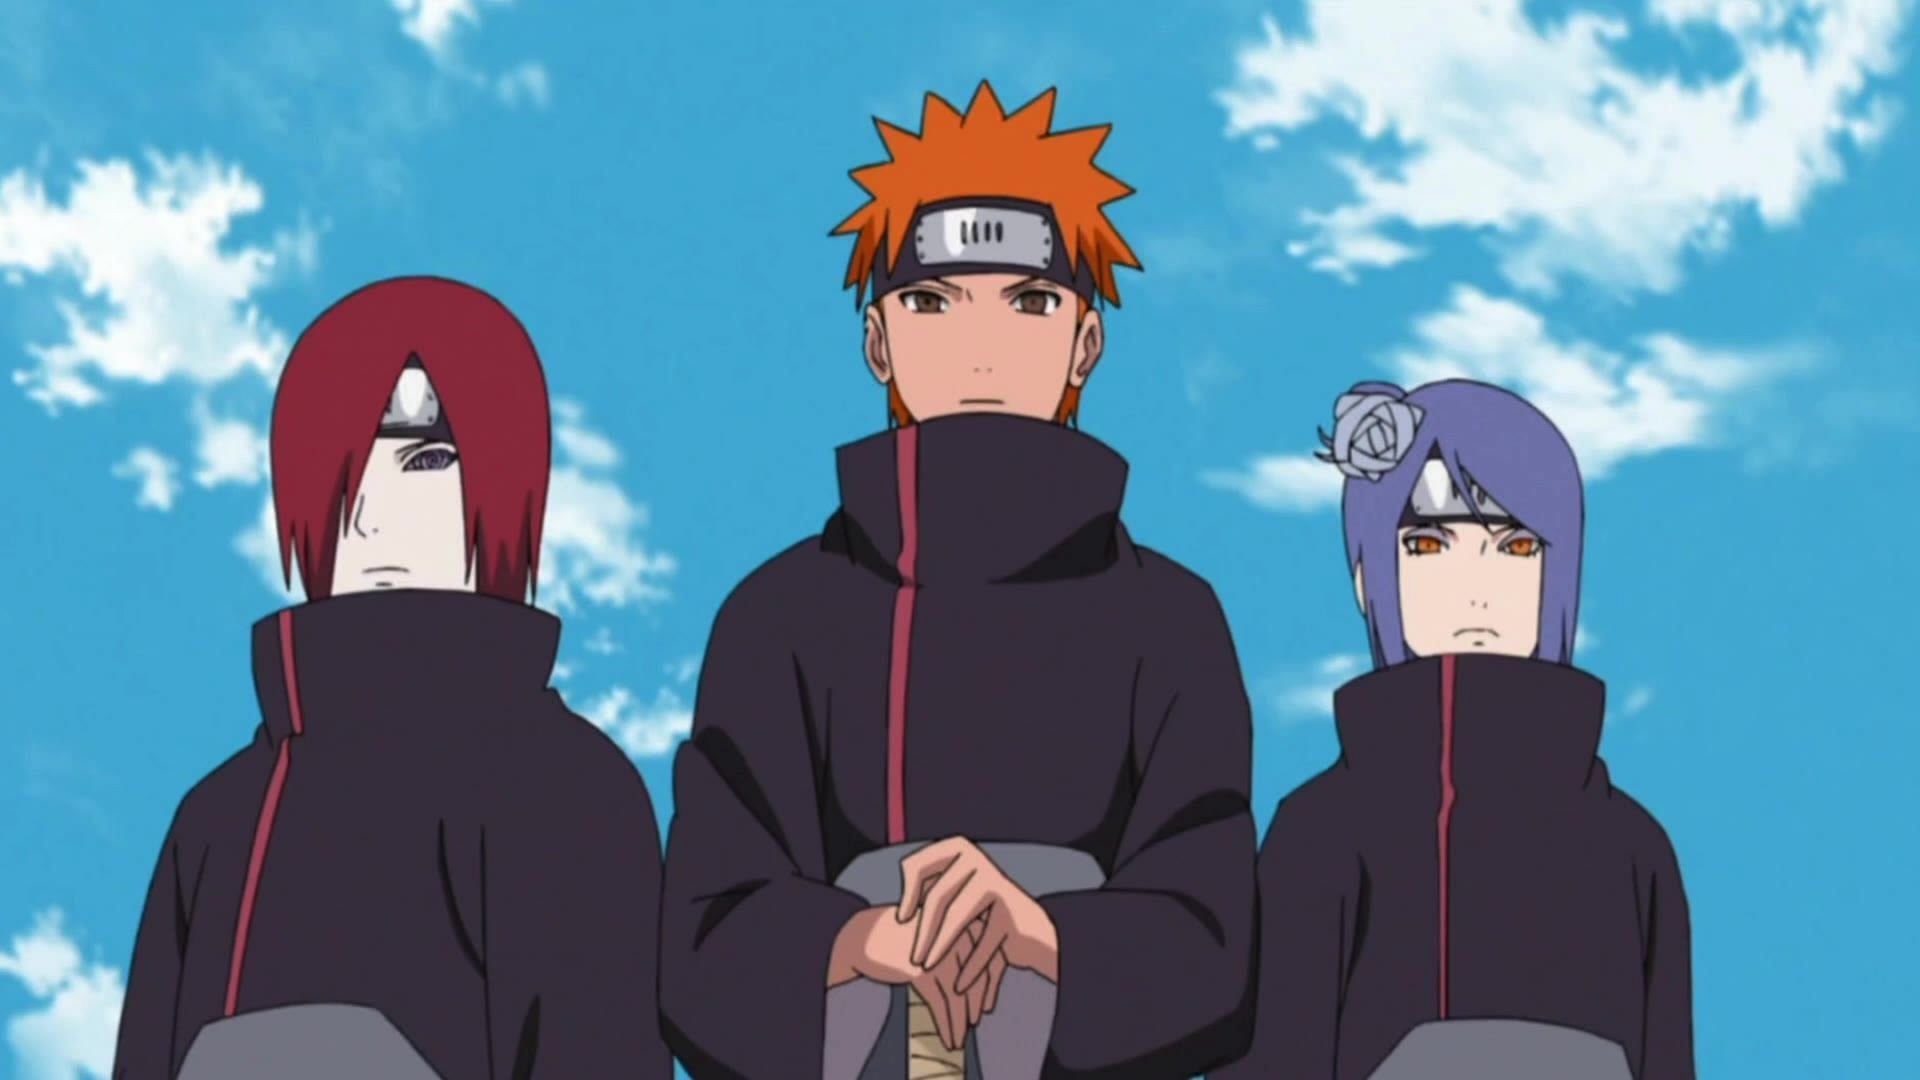 Yahiko (centre) flanked by Konan (right) and Nagato (left) (Image by Studio Pierrot)